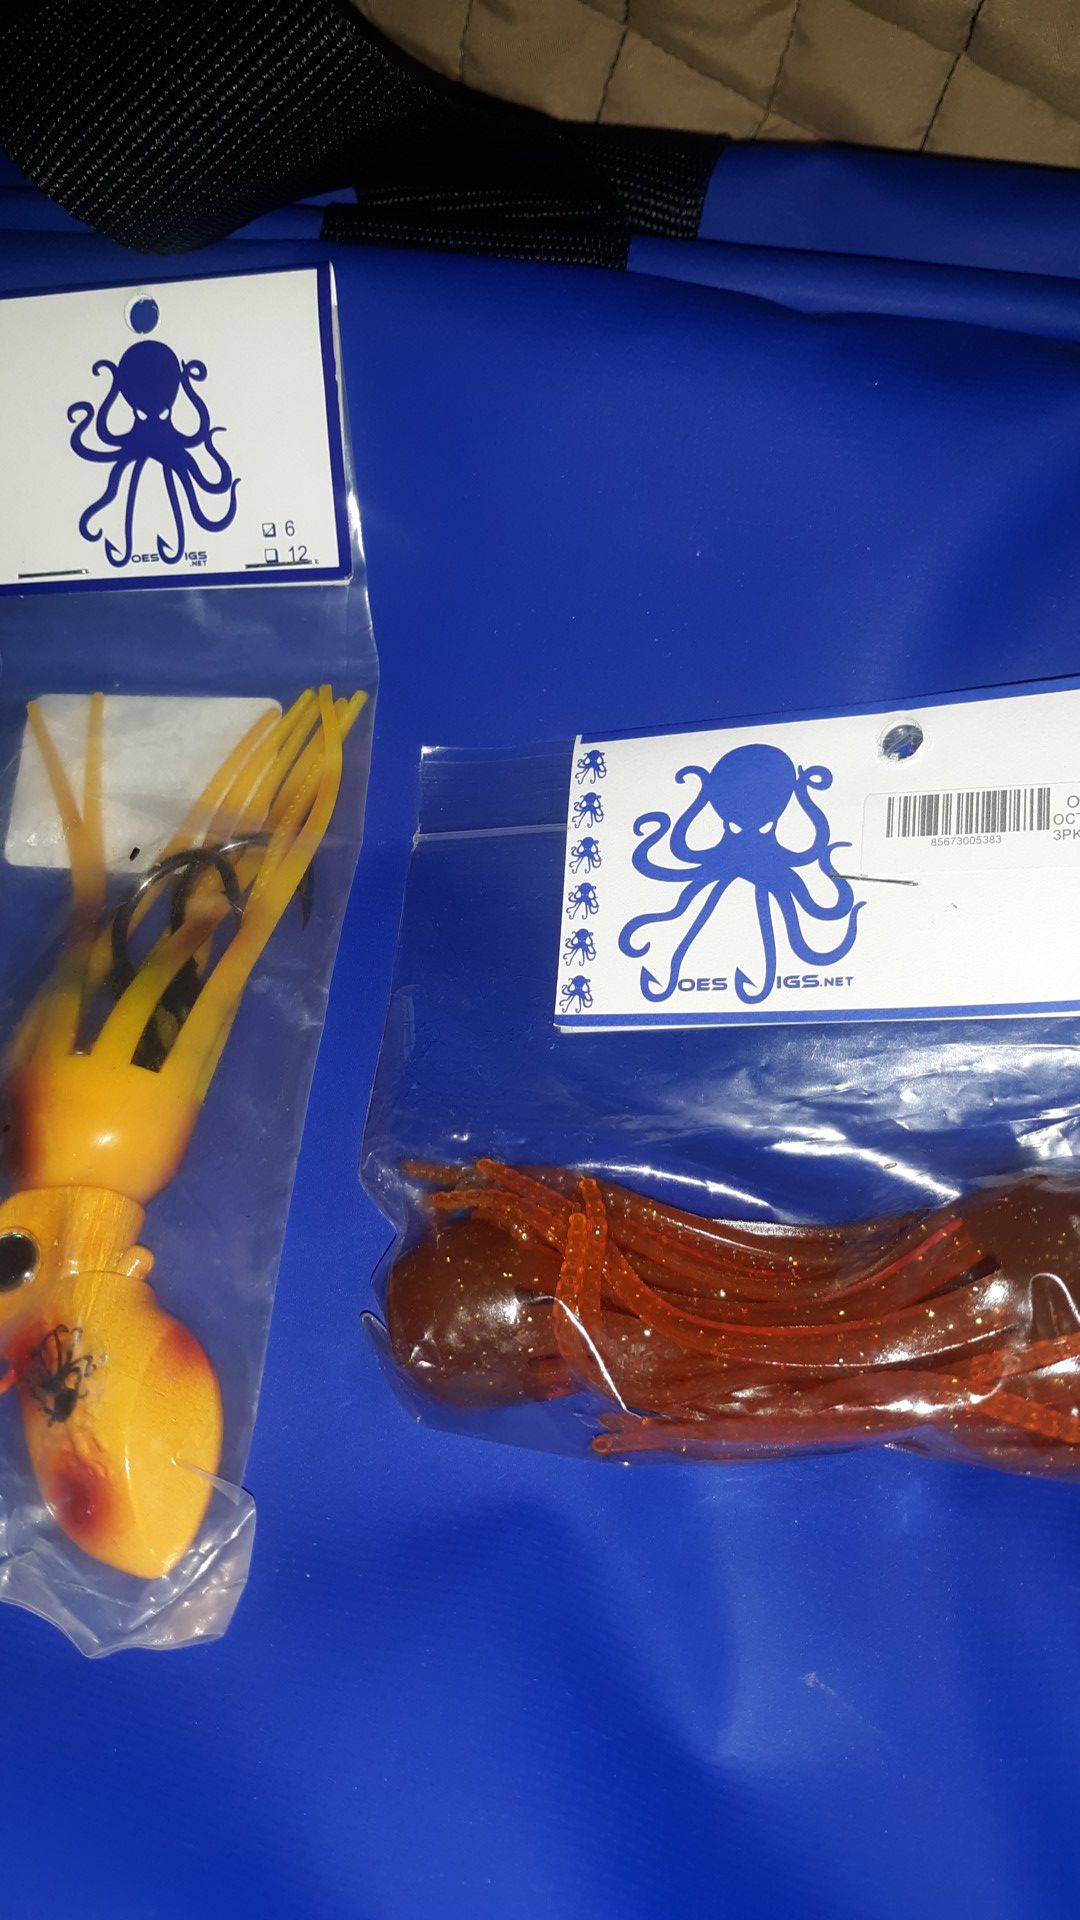 Joe's jigs Octopus with additional interchangeable skirts included for deep sea fishing